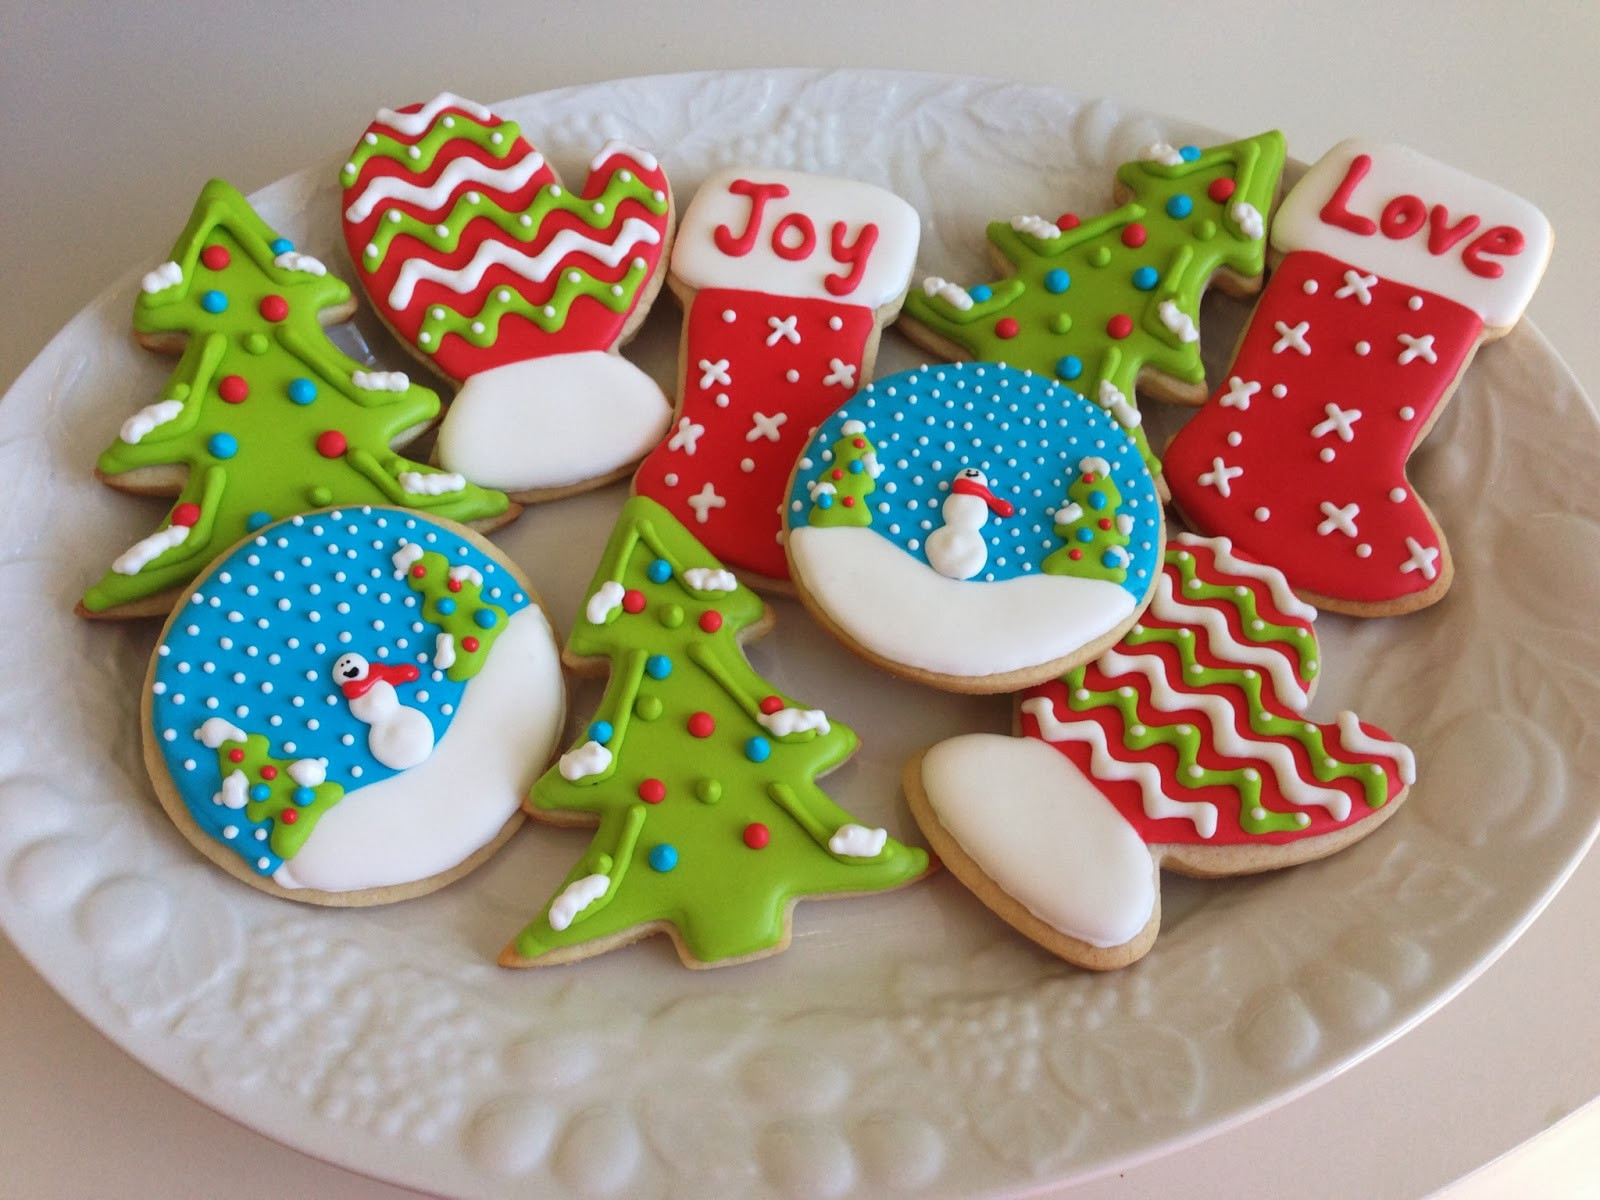 Royal Icing Cookies Recipe
 monograms & cake Christmas Cut Out Sugar Cookies with